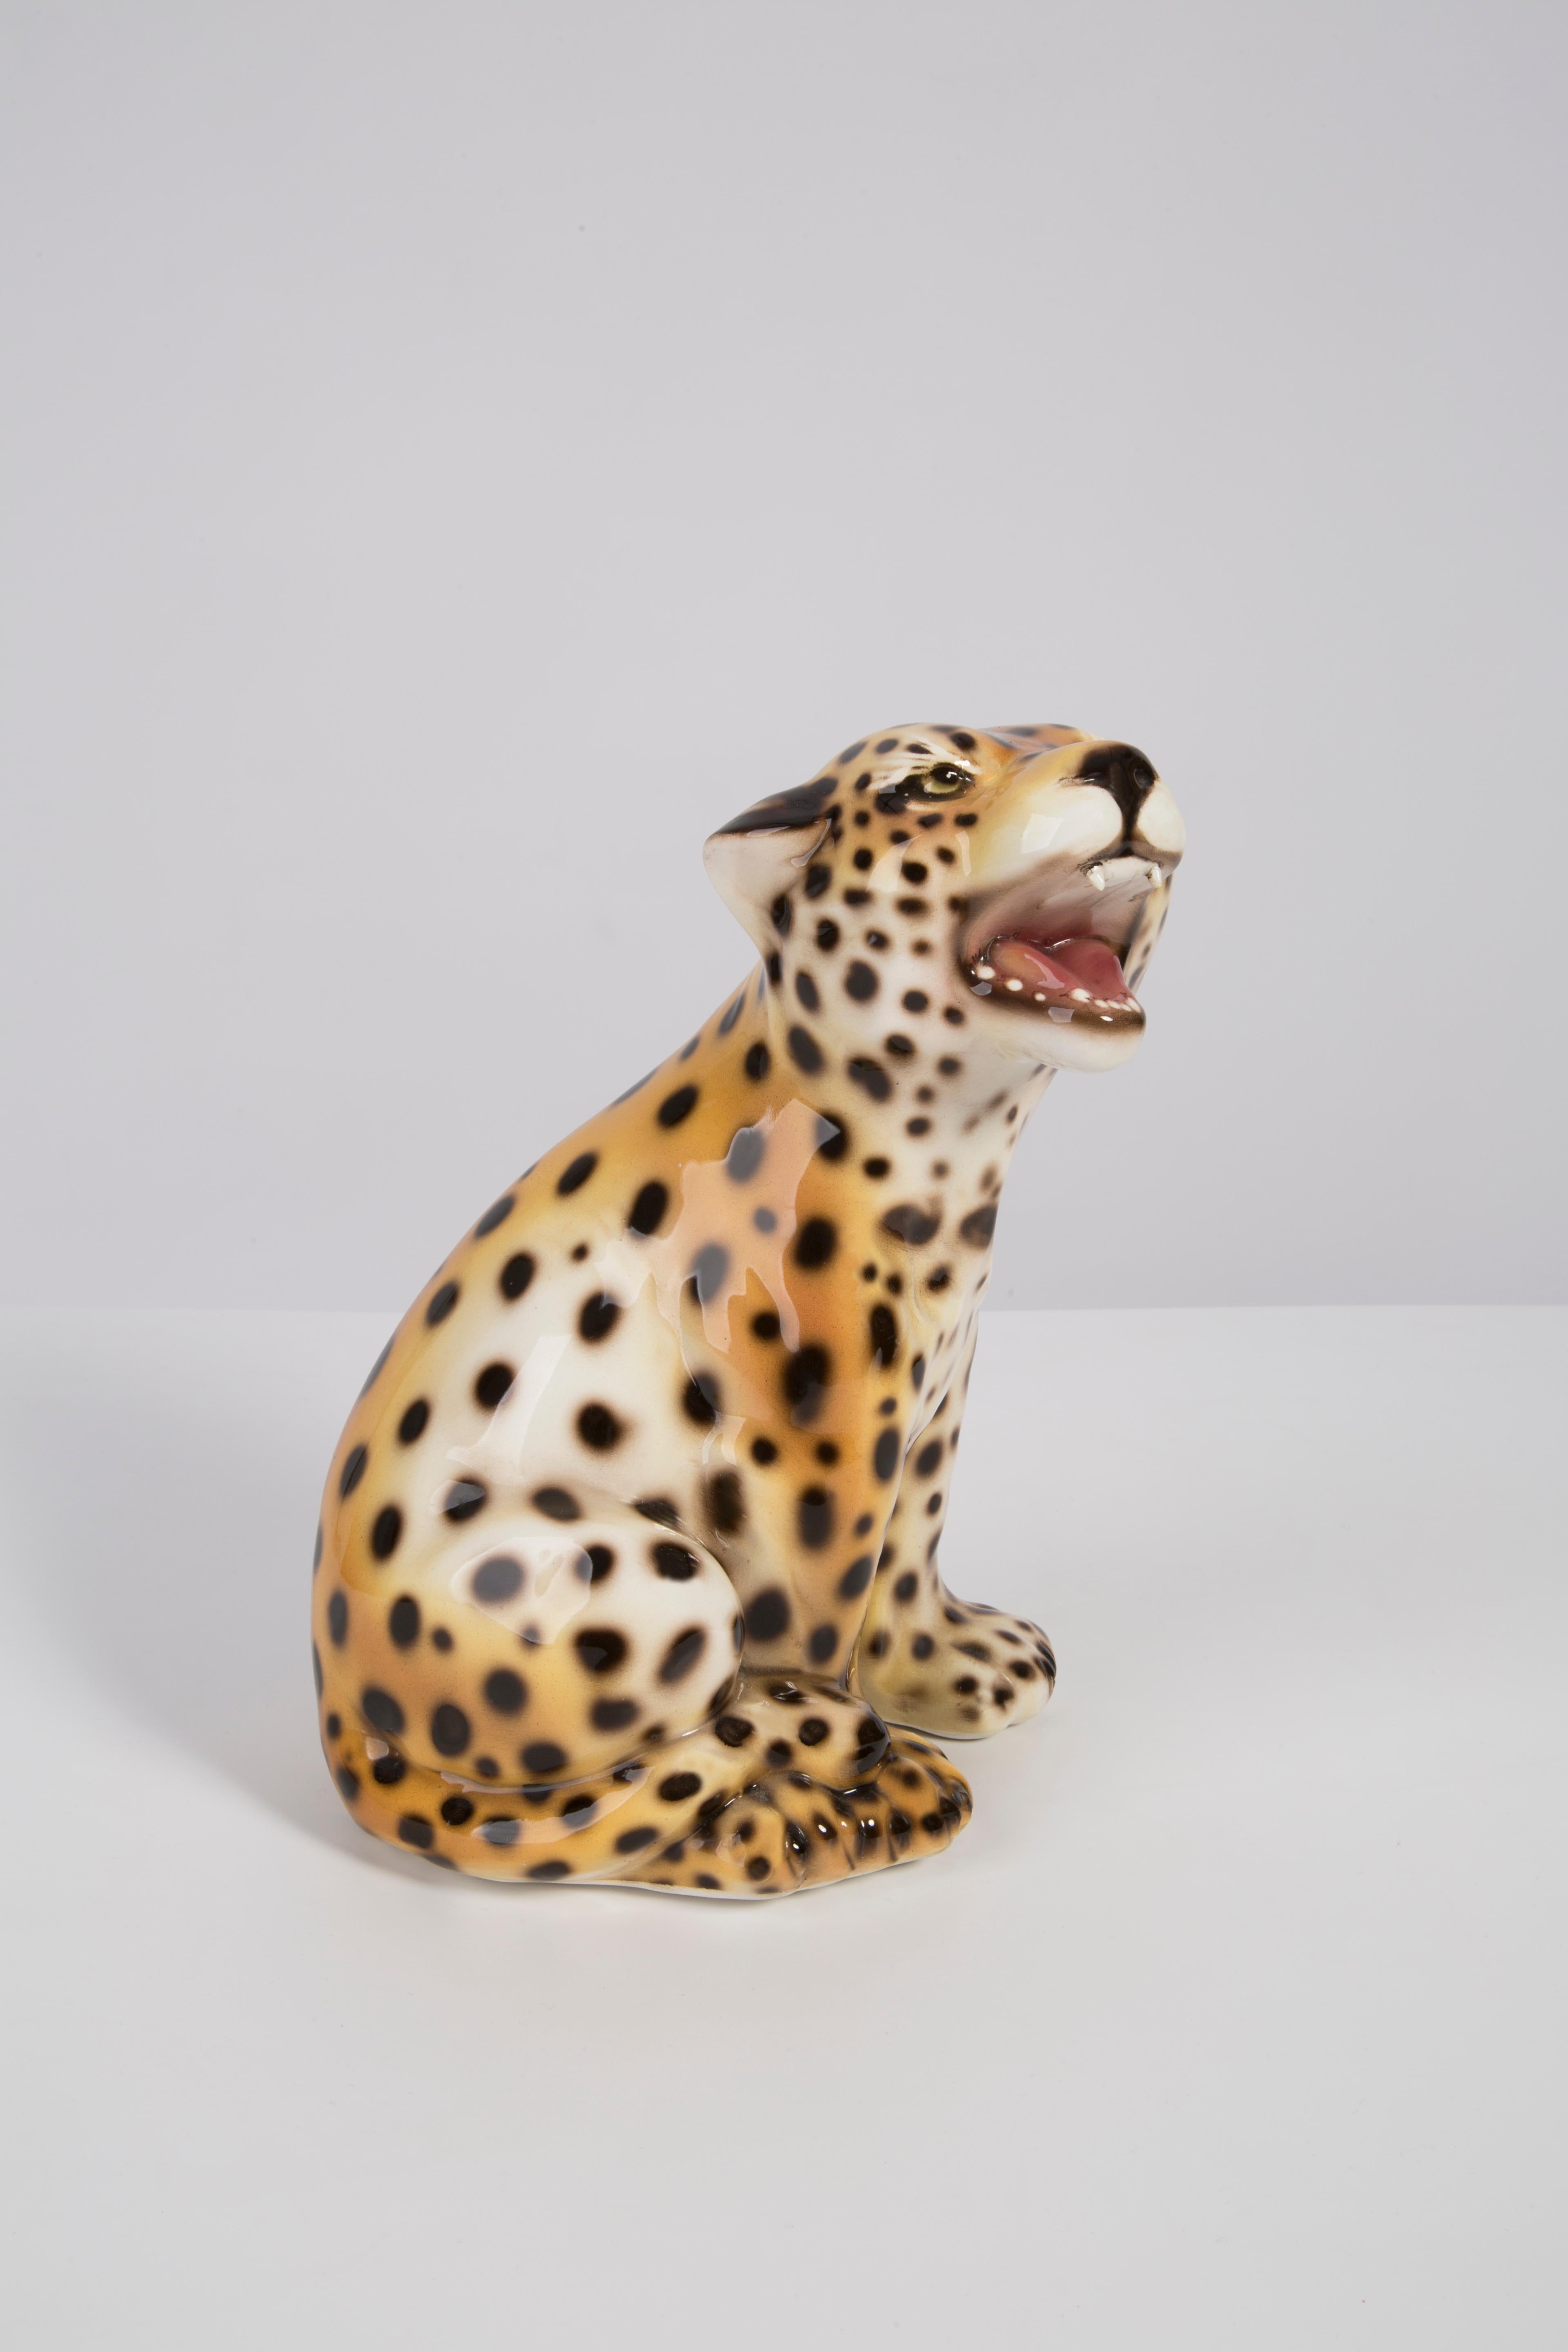 Painted ceramic, perfect condition. Beautiful and unique decorative small sculpture. Leopard was produced in 1960s in Italy.